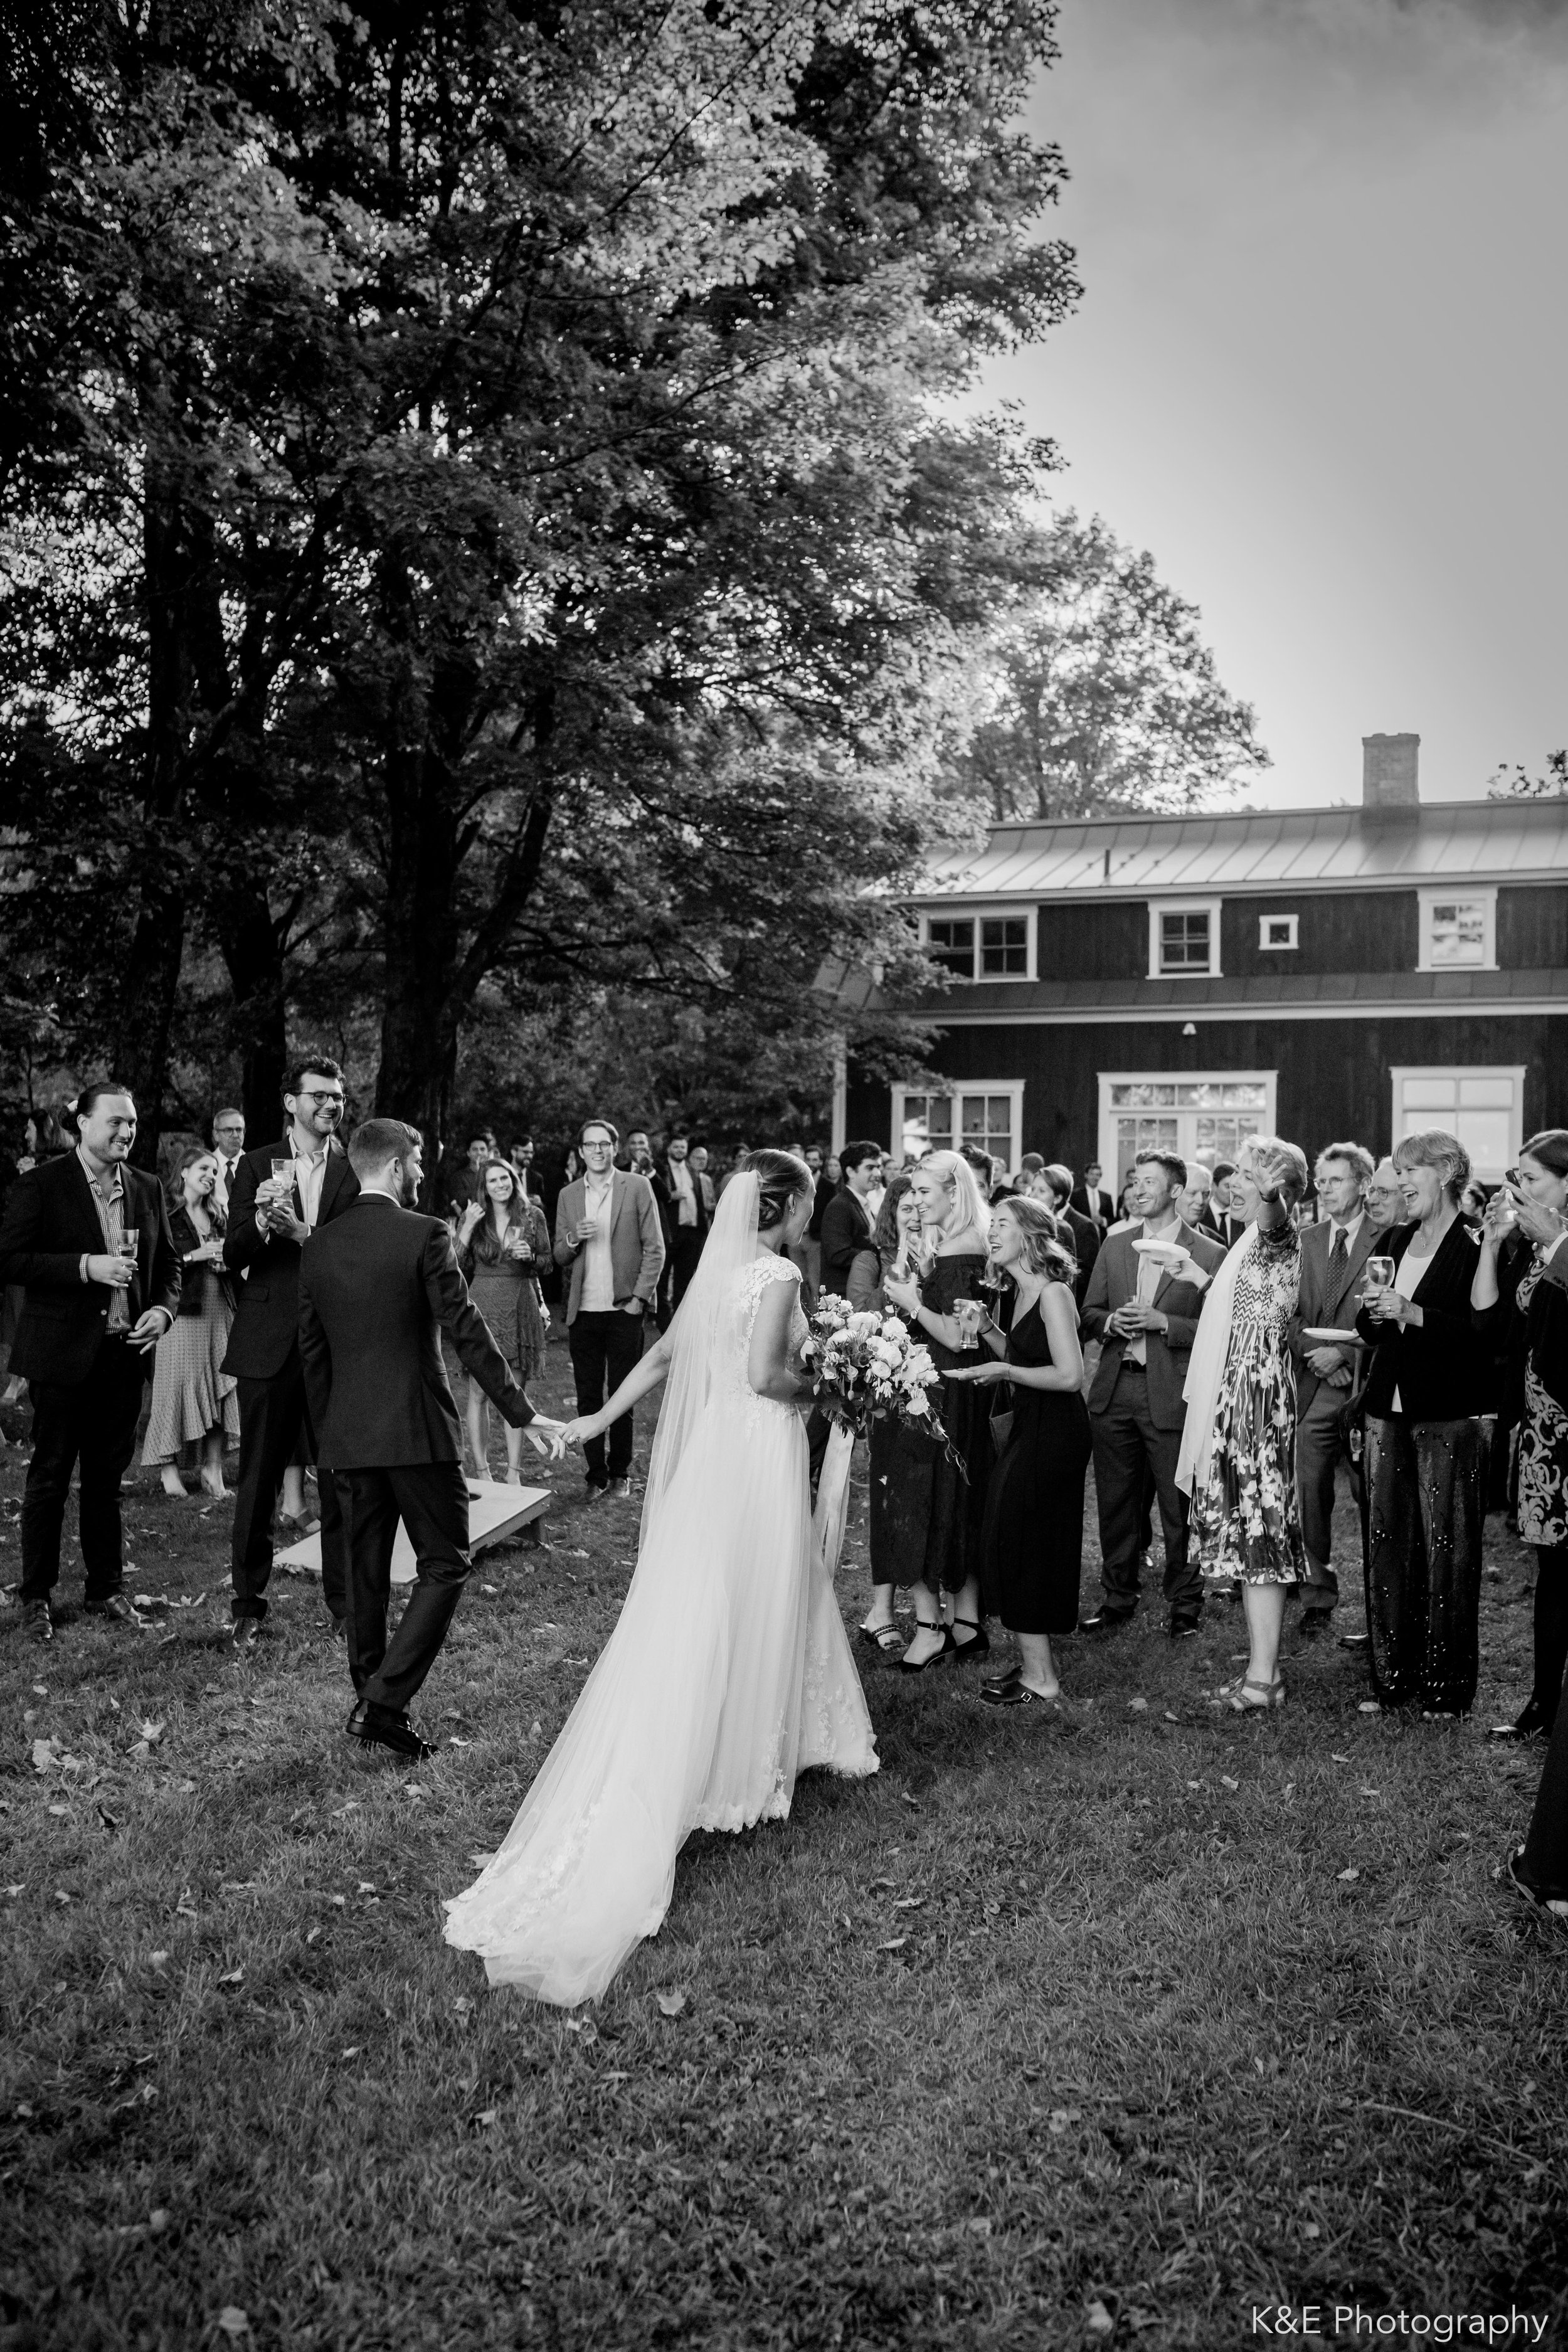 A bride and groom walking through their guests on the way to the barn